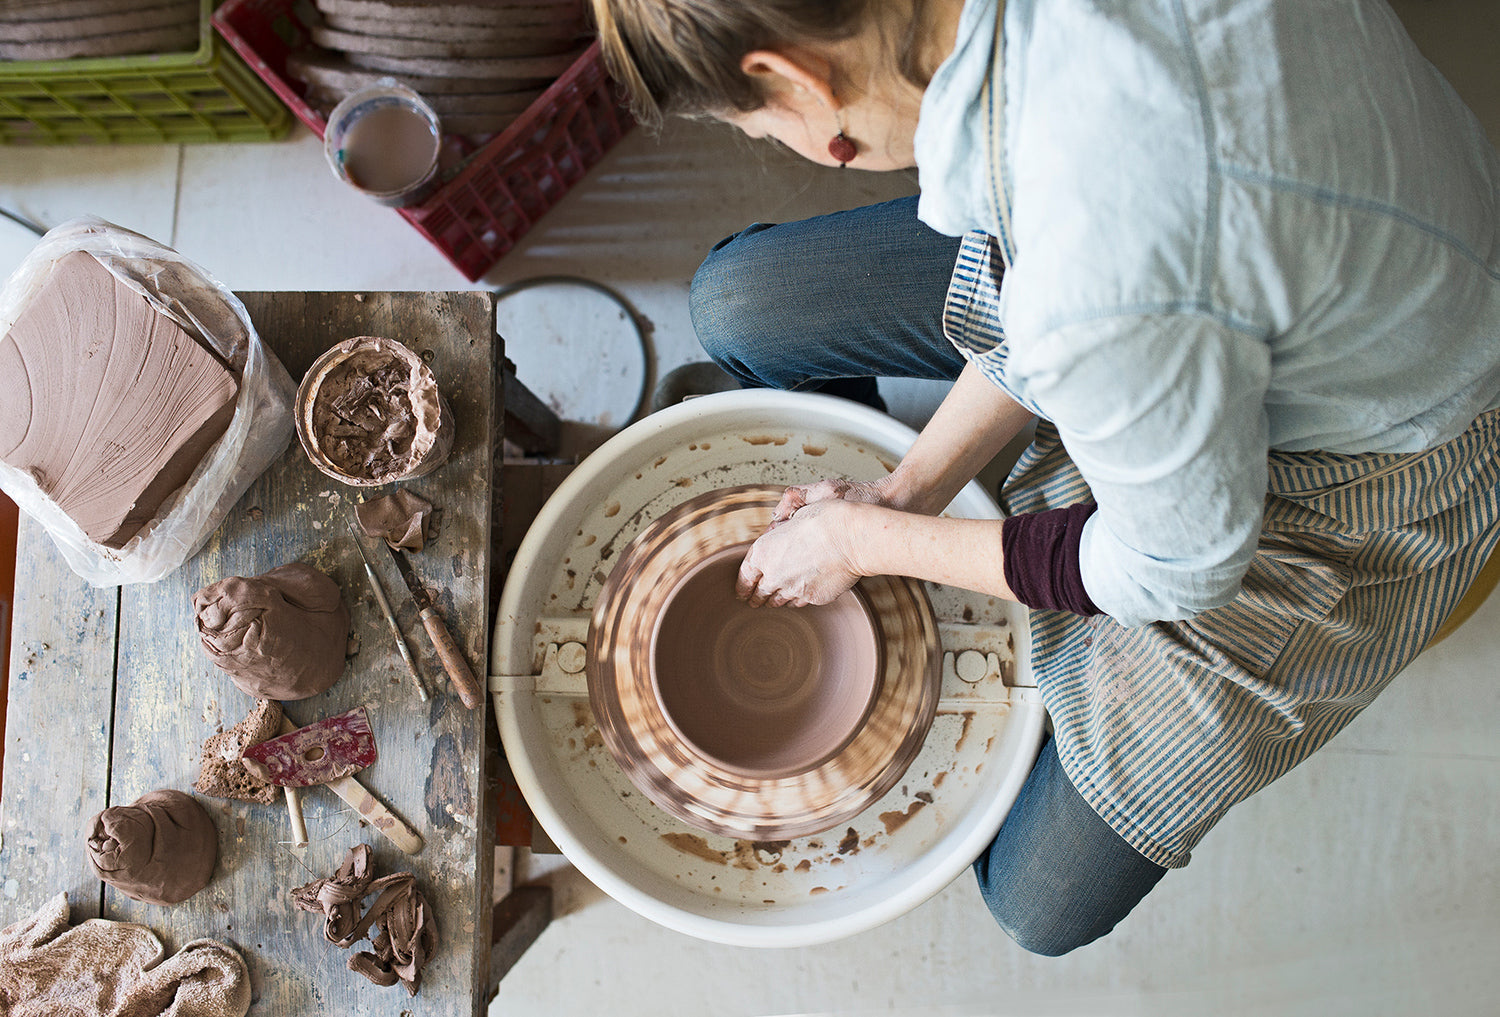 Ceramicist Wynne Noble carefully sculpting a bowl out of red clay on a throwing wheel